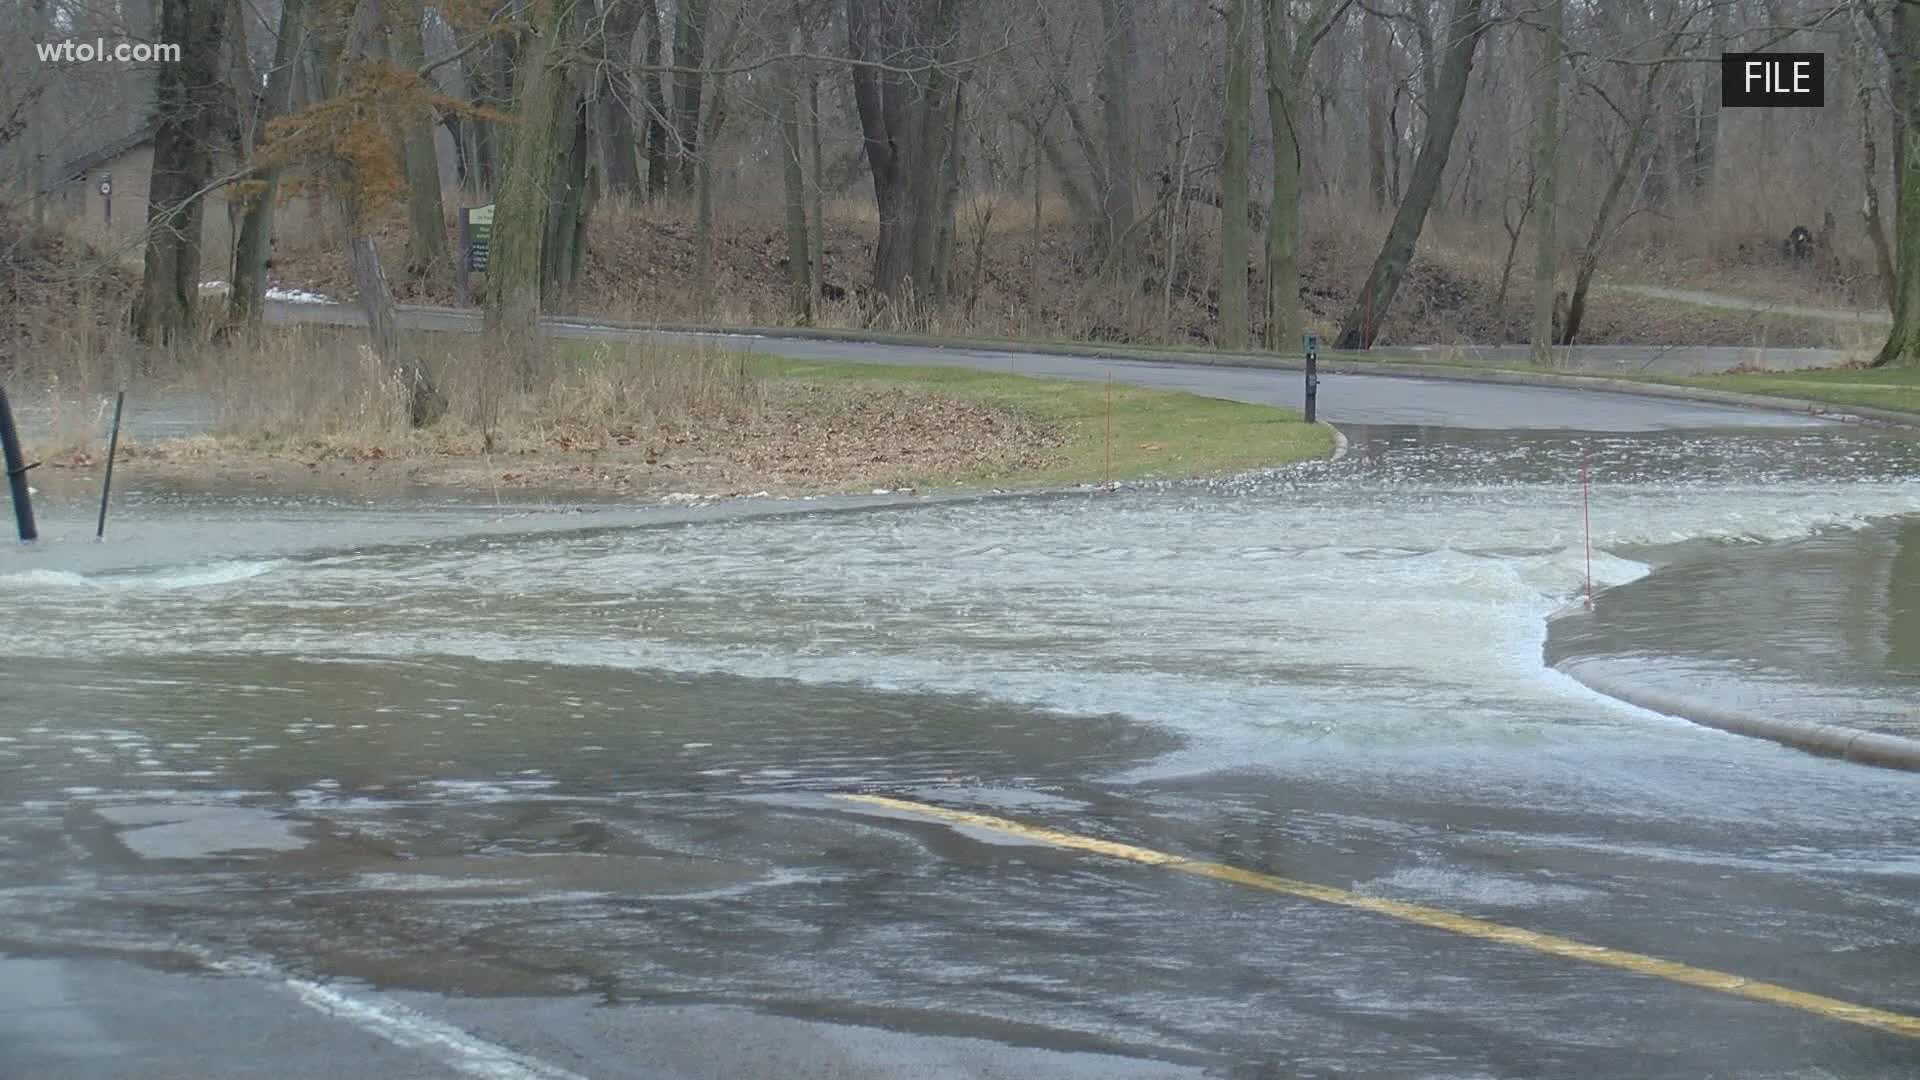 Officials with Toledo Metroparks and Wood County are keeping an eye on how things play out over the next week.